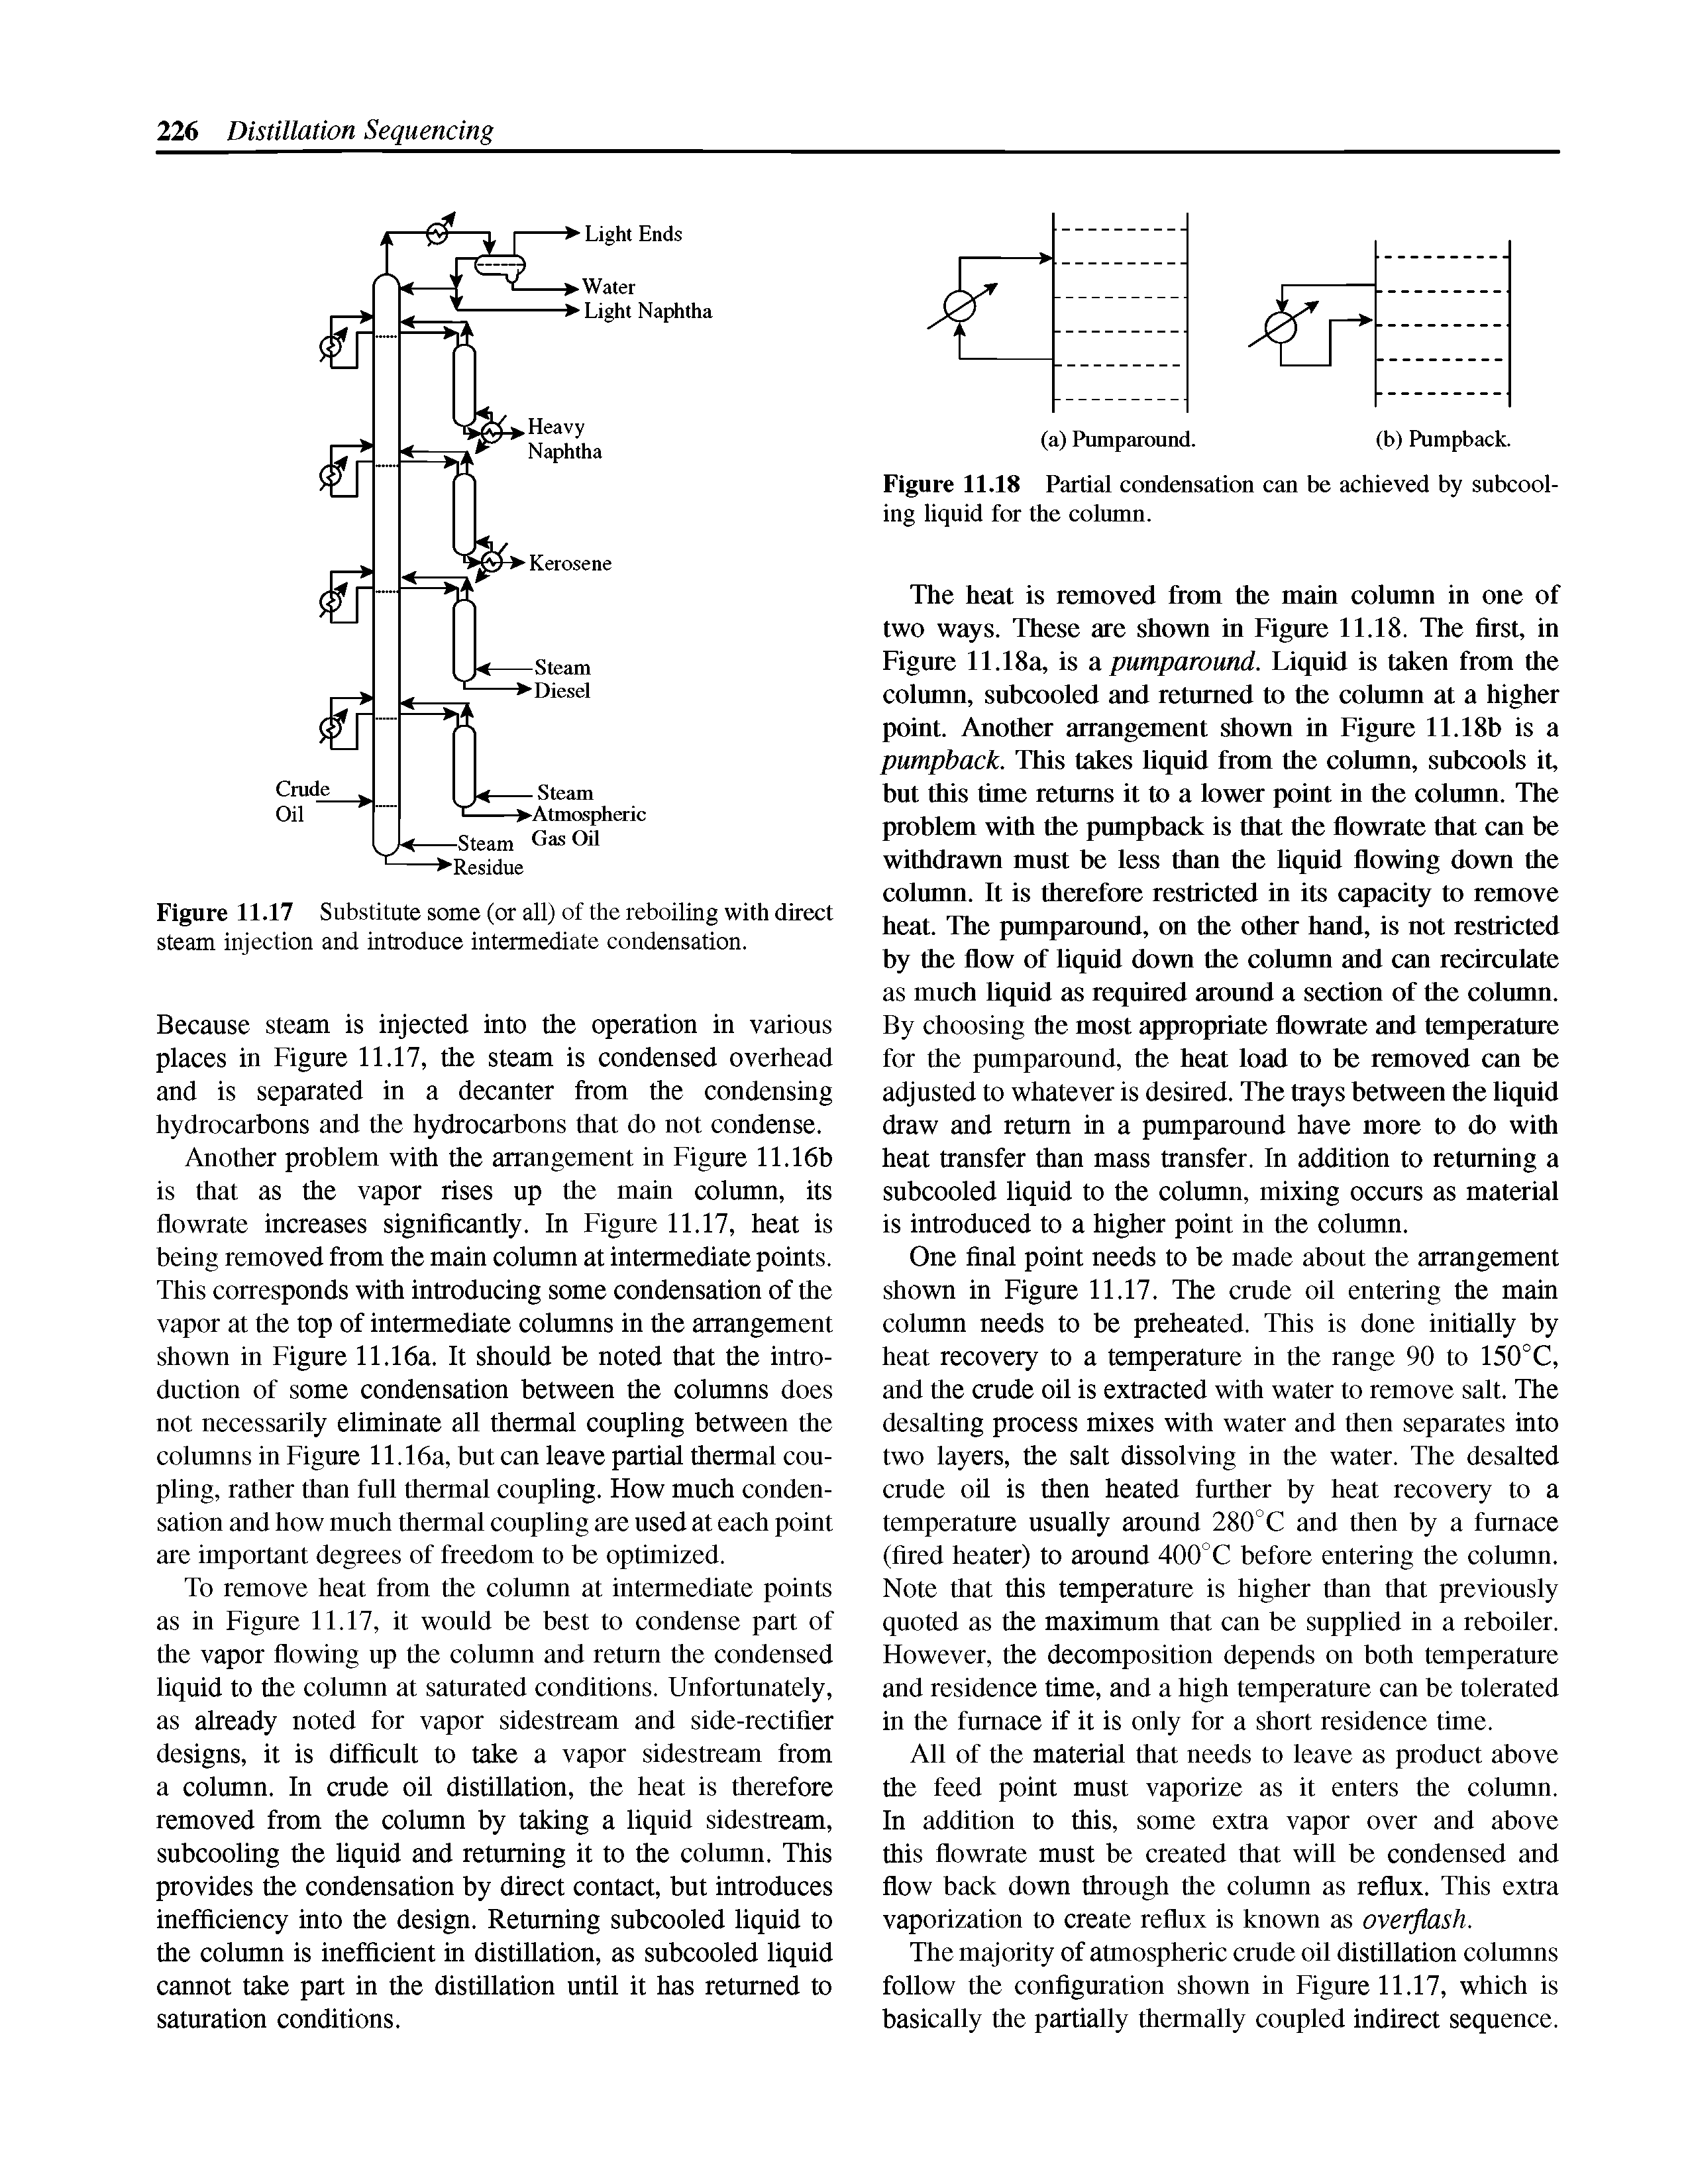 Figure 11.17 Substitute some (or all) of the reboiling with direct steam injection and introduce intermediate condensation.